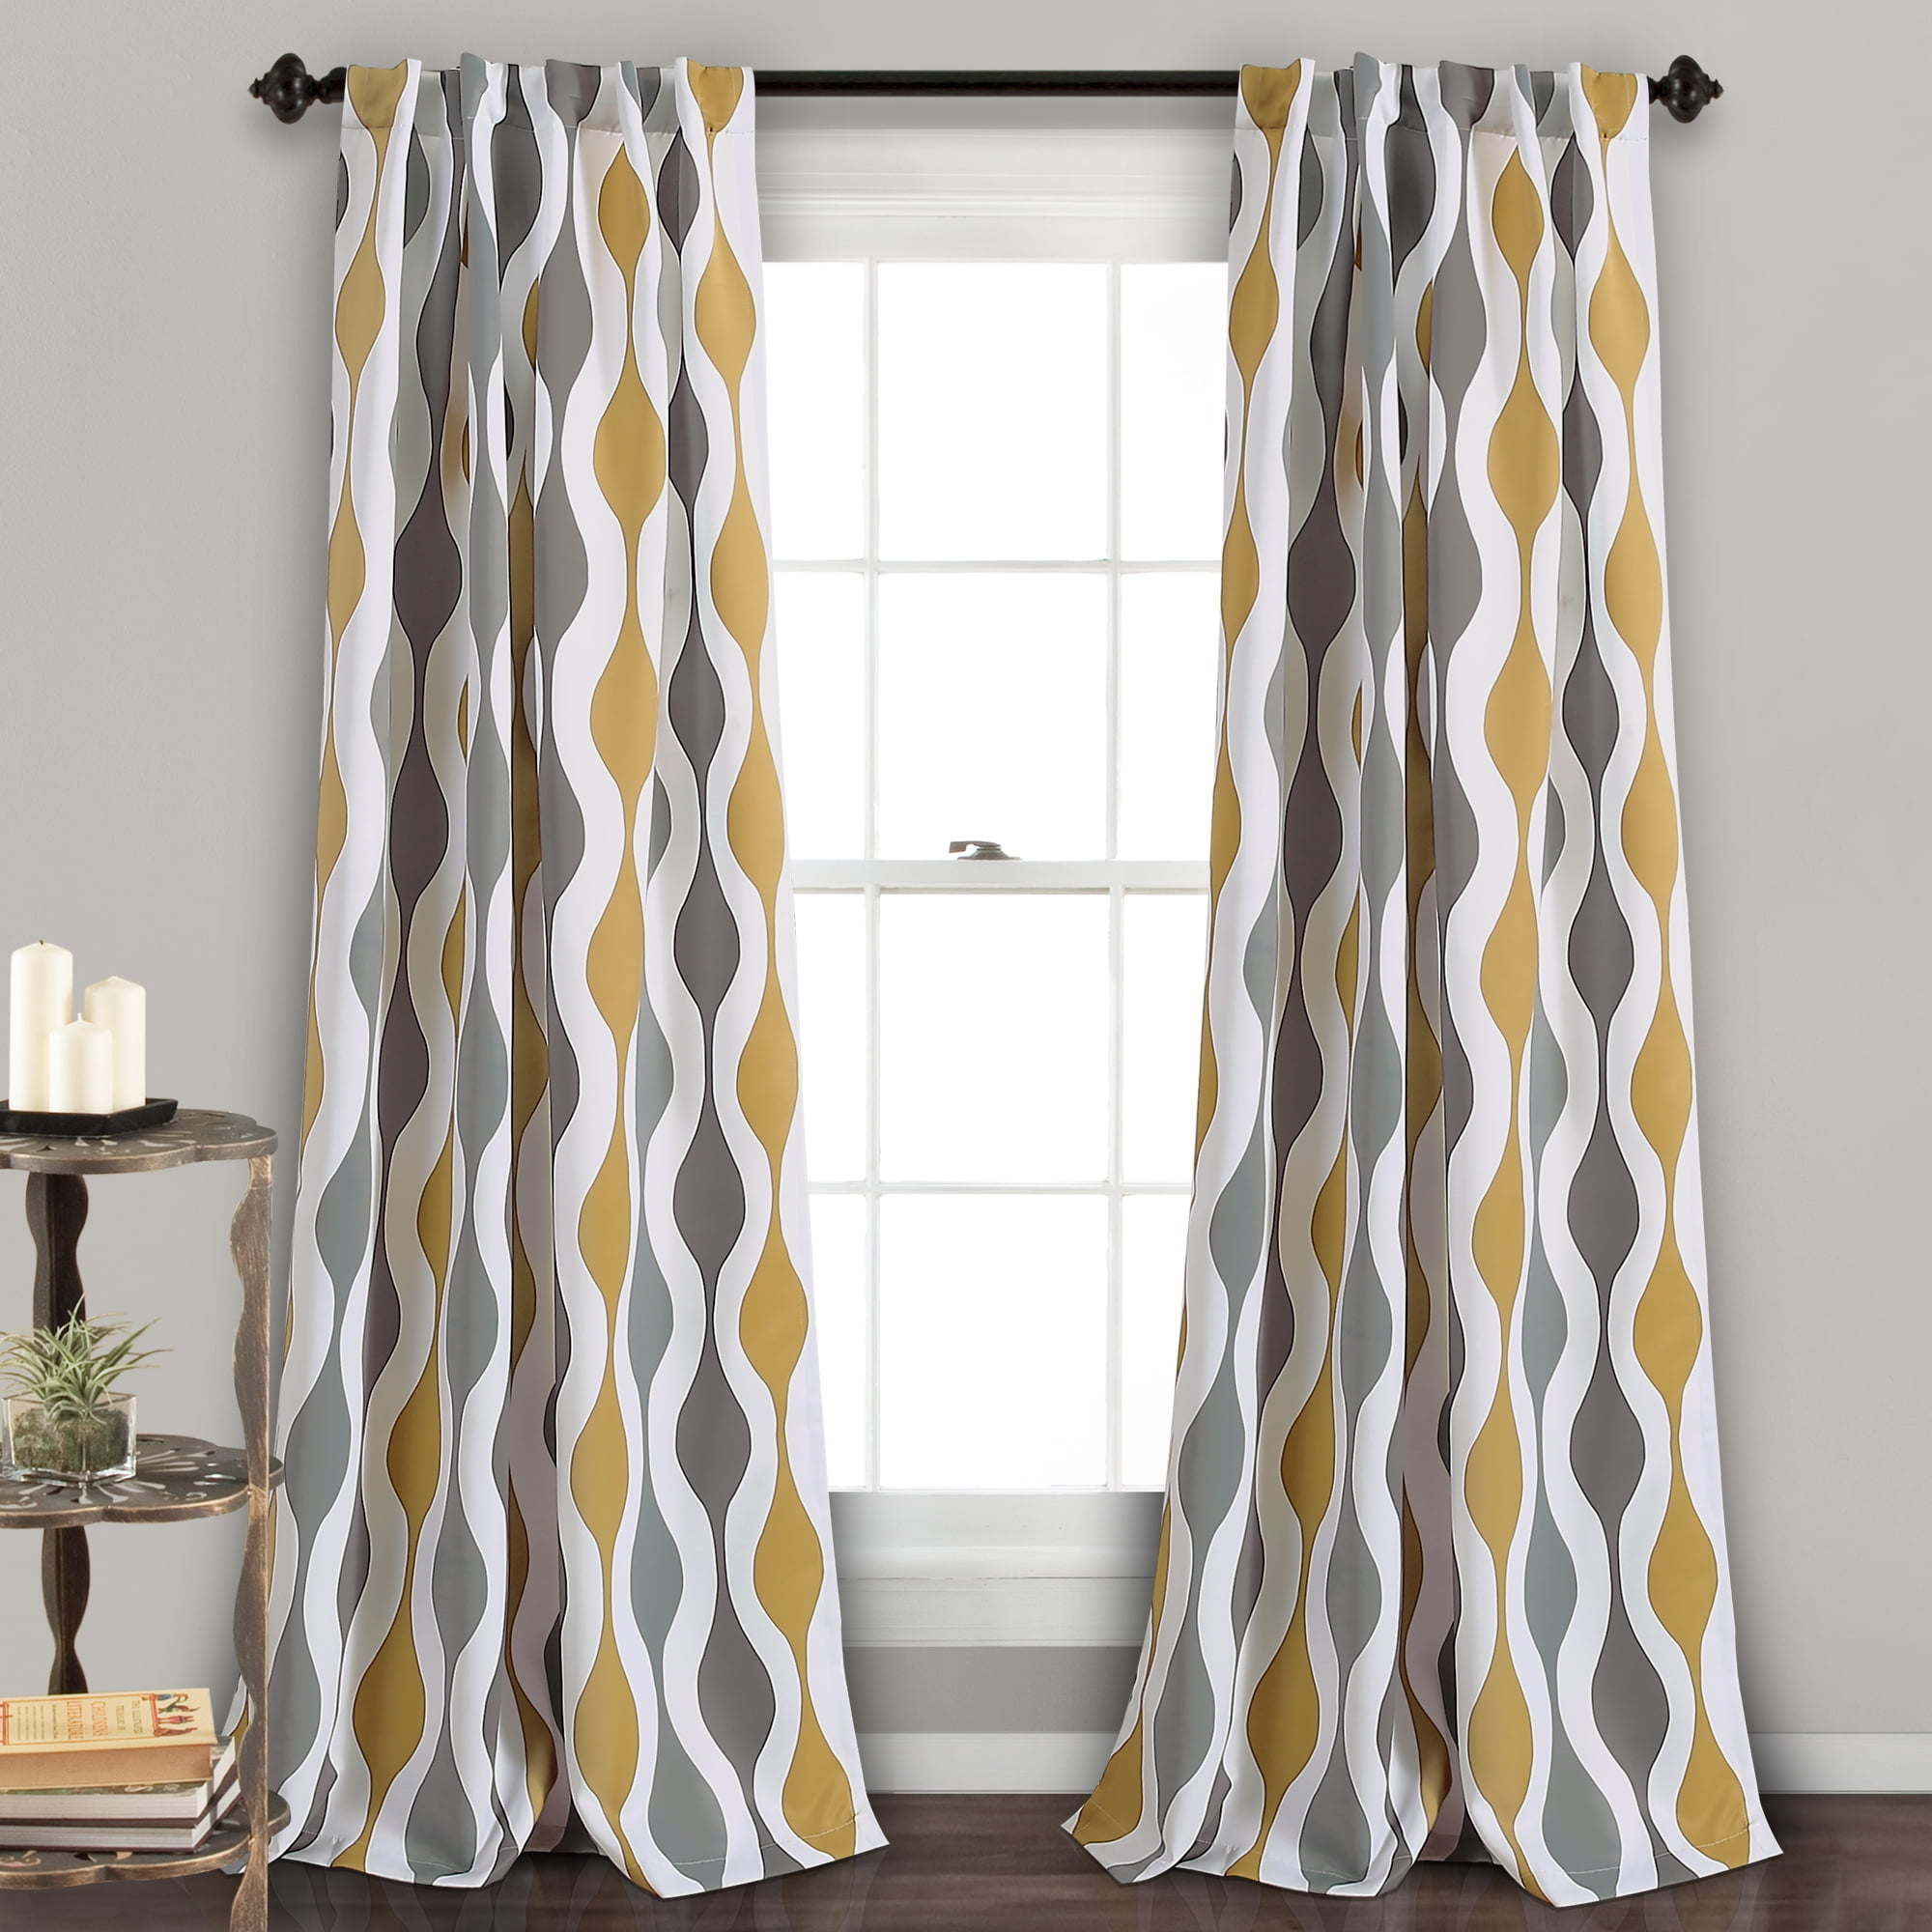 DriftAway Riley Geo Room Darkening Blackout Thermal Insulated Grommet Lined Window Curtains Mid Century Geometric Pattern 2 Layers 2 Panels Each 52 Inch by 96 Inch Gold Black Gray